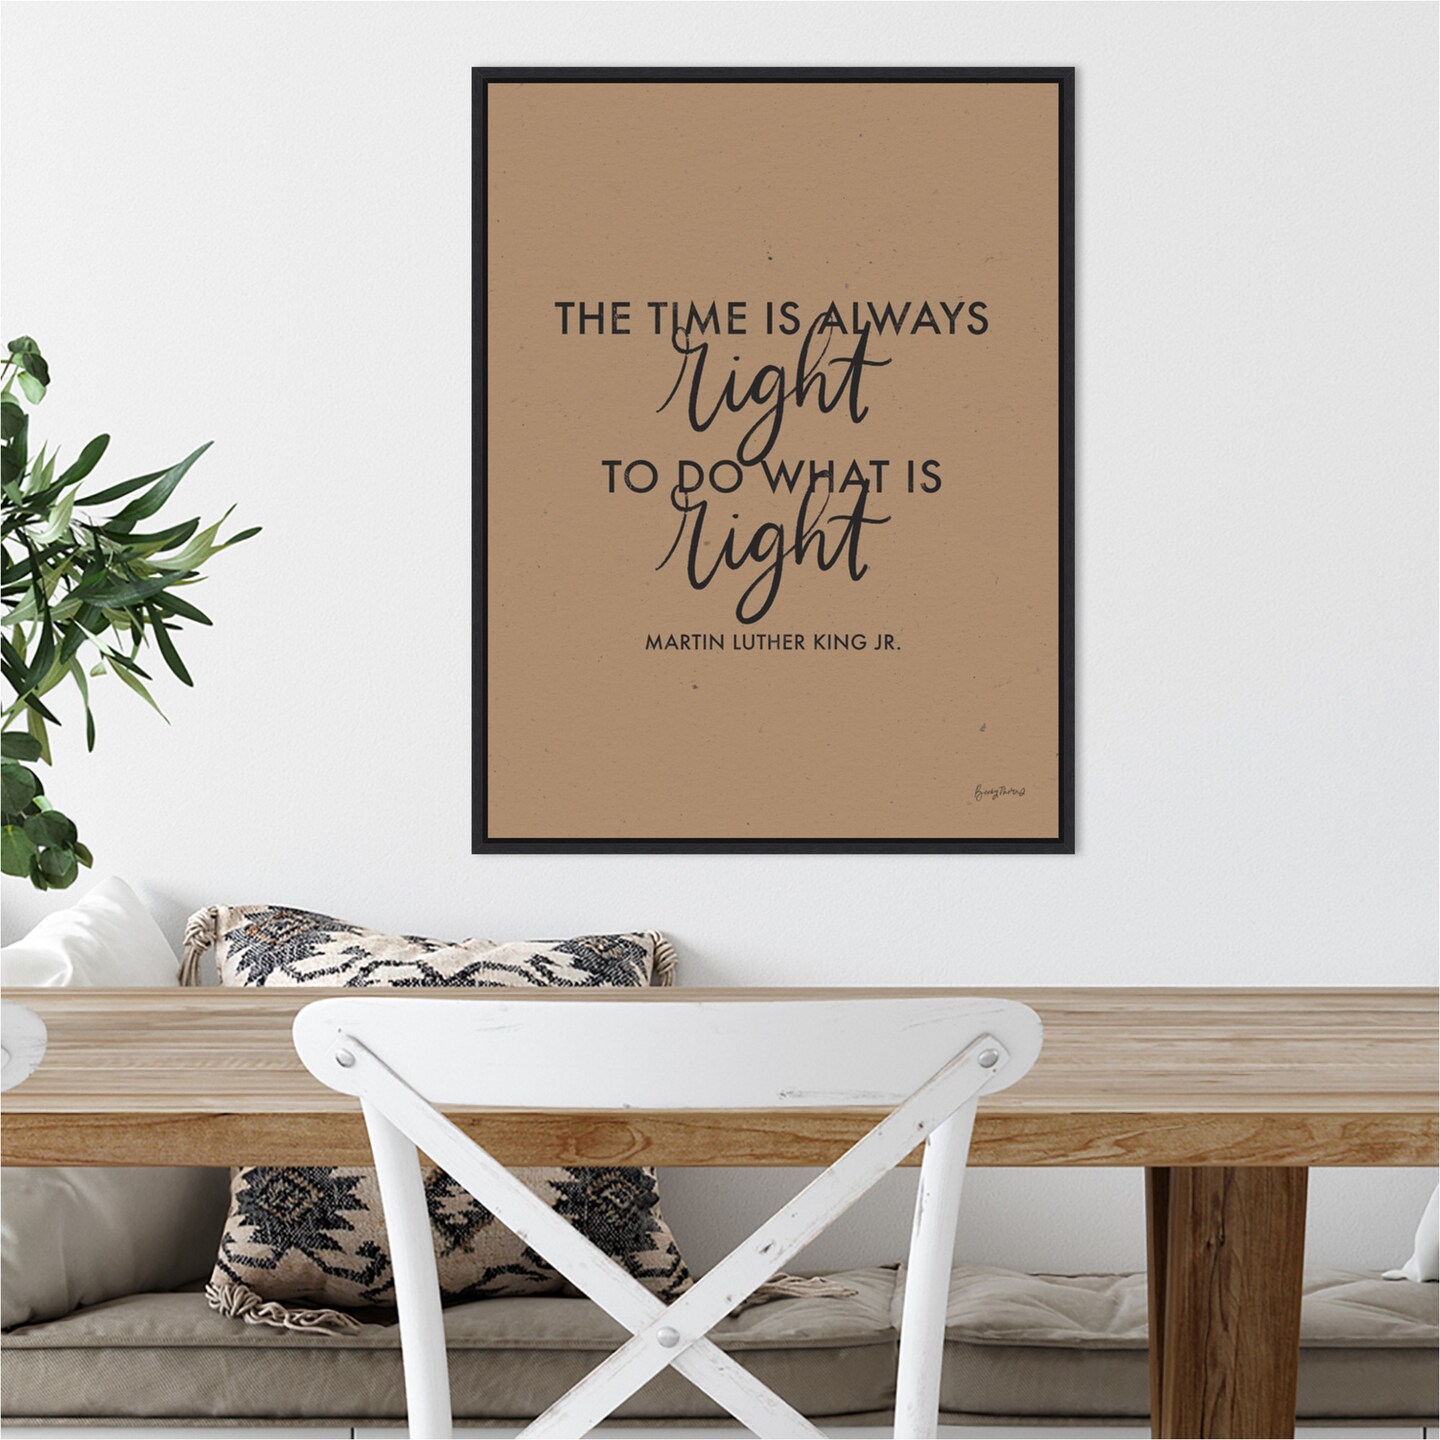 Words of Wisdom IV - The Time is Right by Becky Thorns 18-in. W x 24-in. H. Canvas Wall Art Print Framed in Black